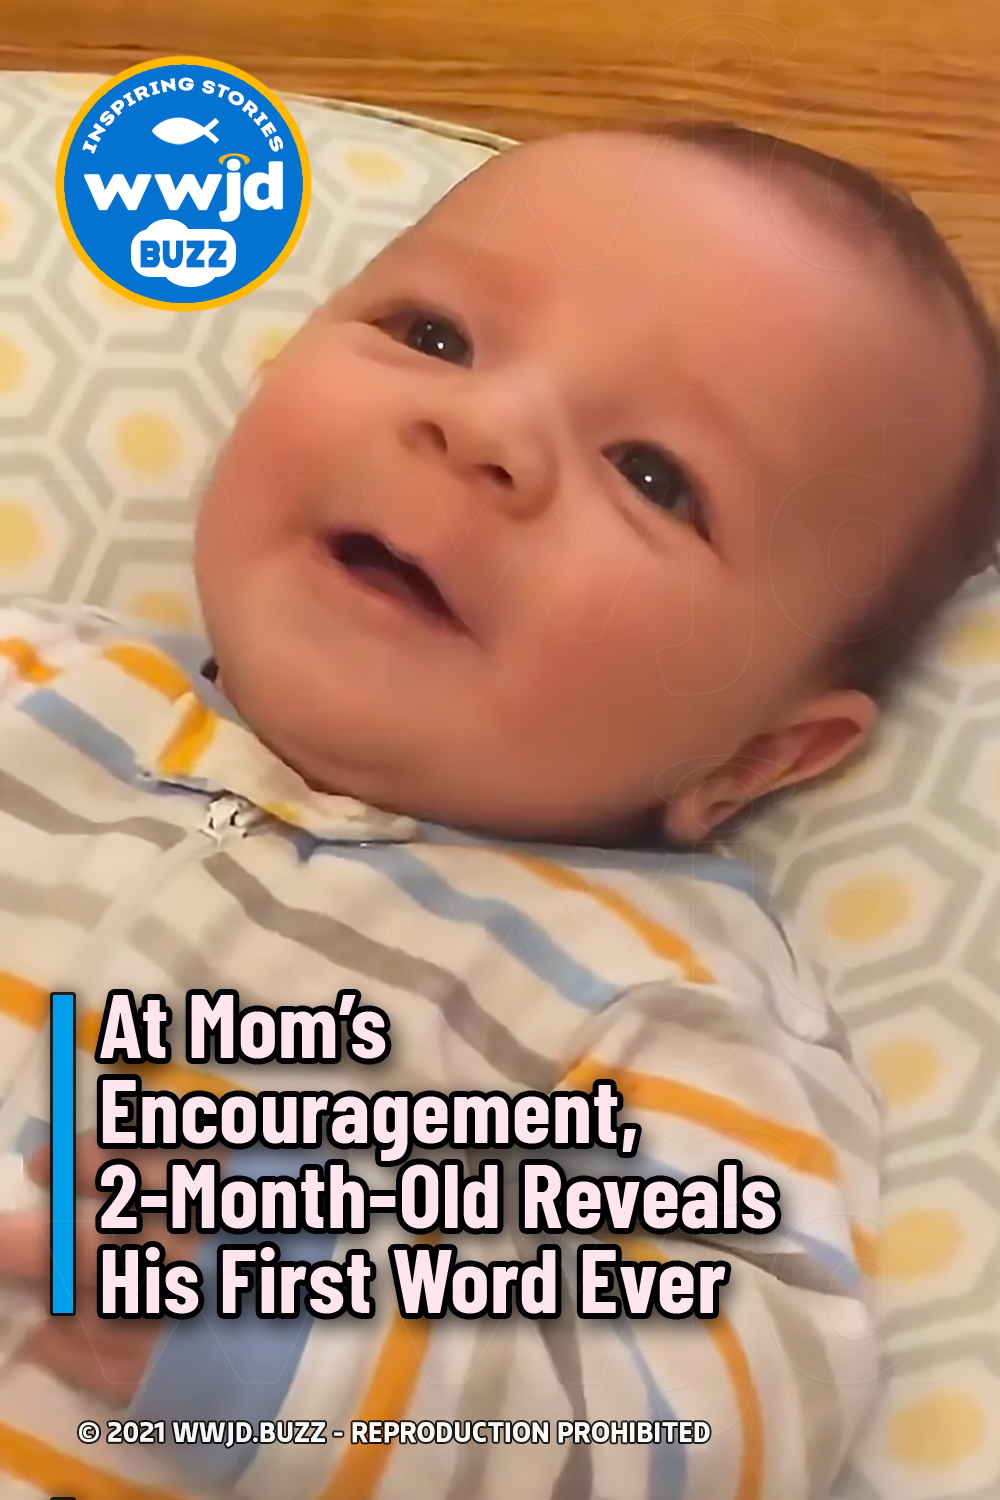 At Mom’s Encouragement, 2-Month-Old Reveals His First Word Ever